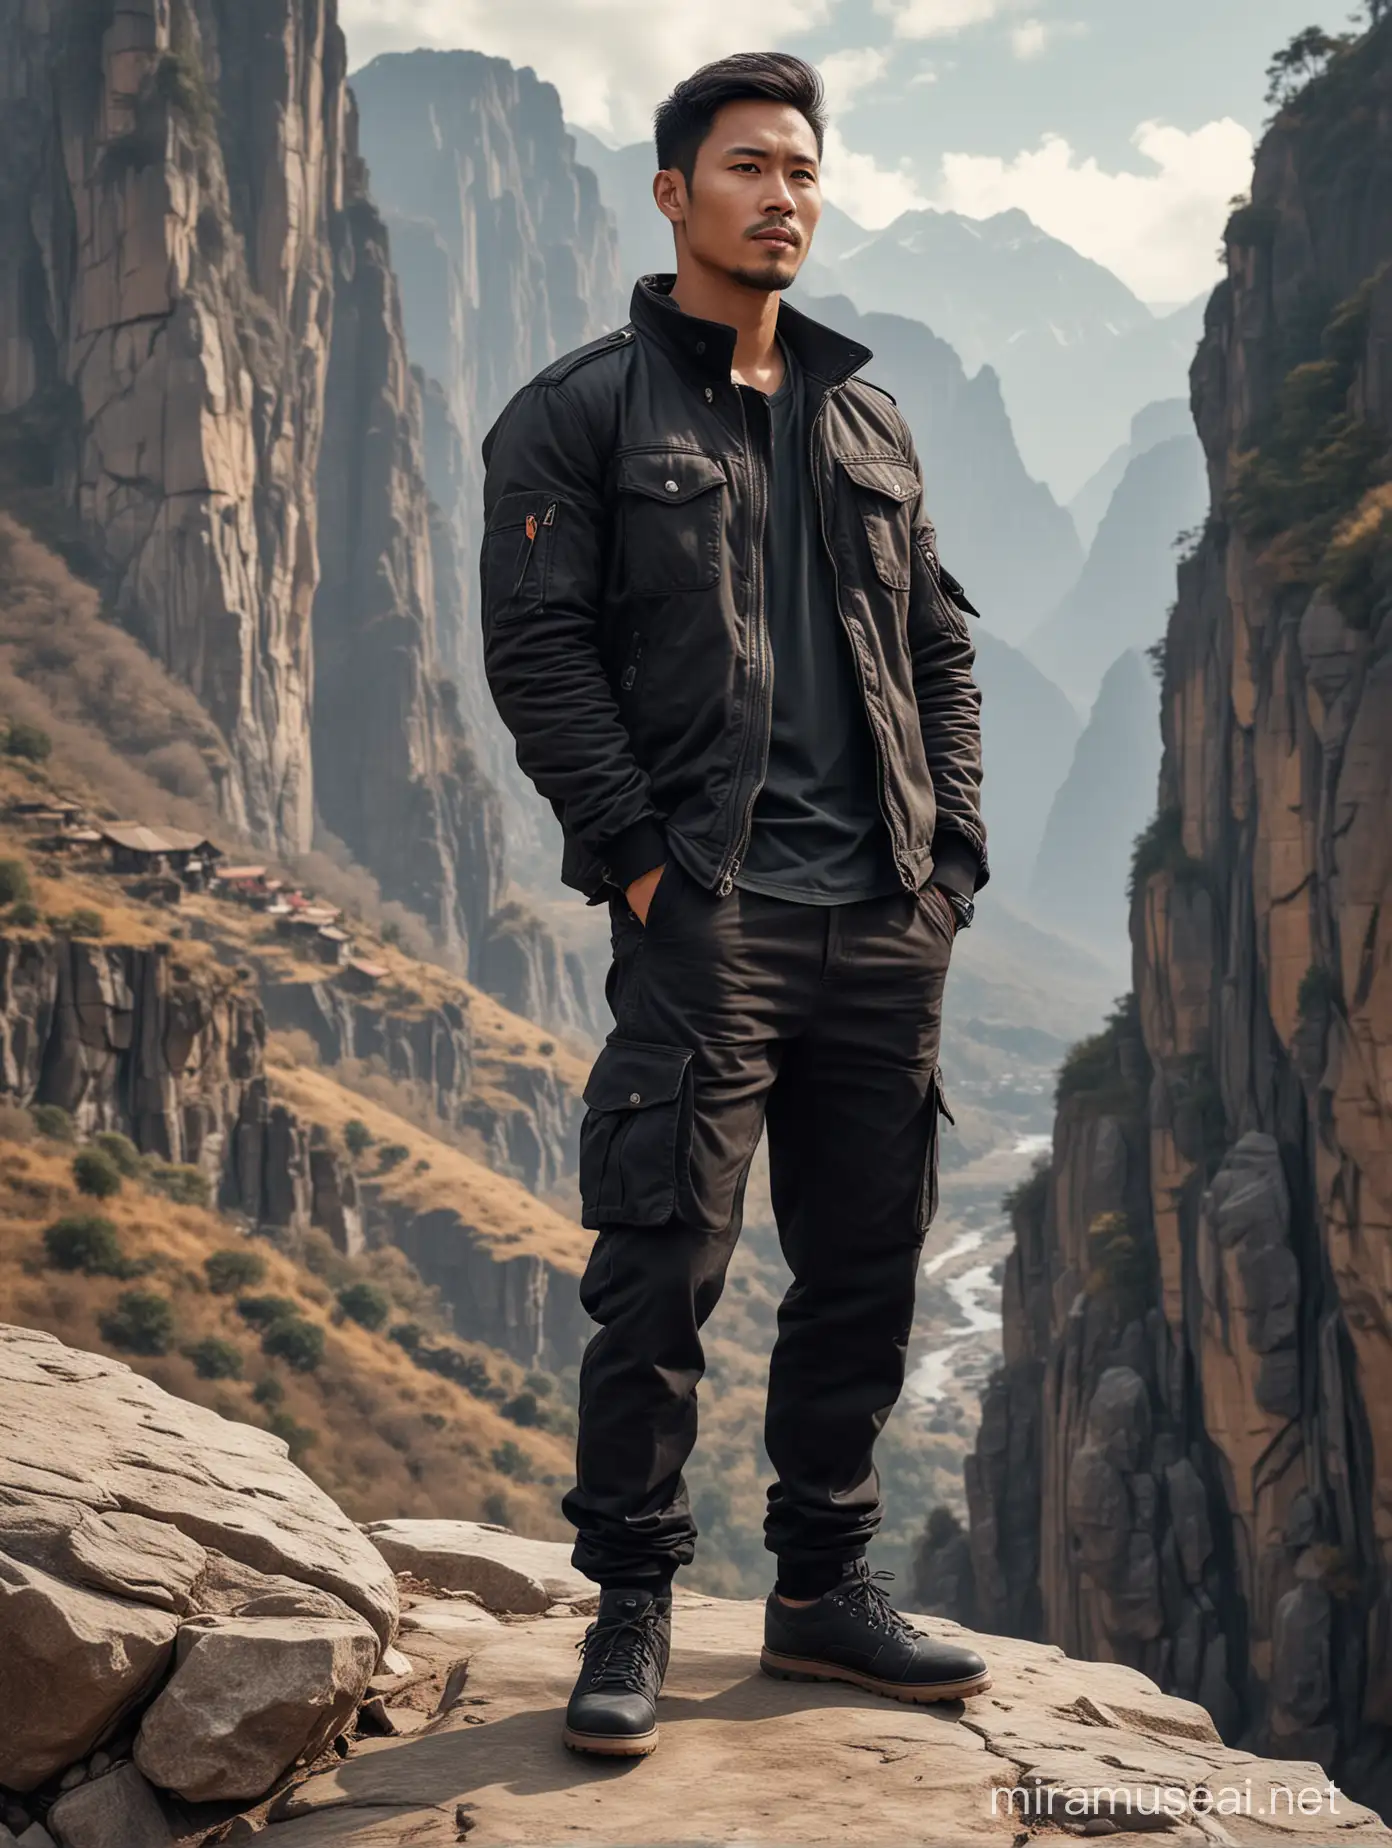 Stylish Indonesian Man Standing on Rocky Mountain Cliff